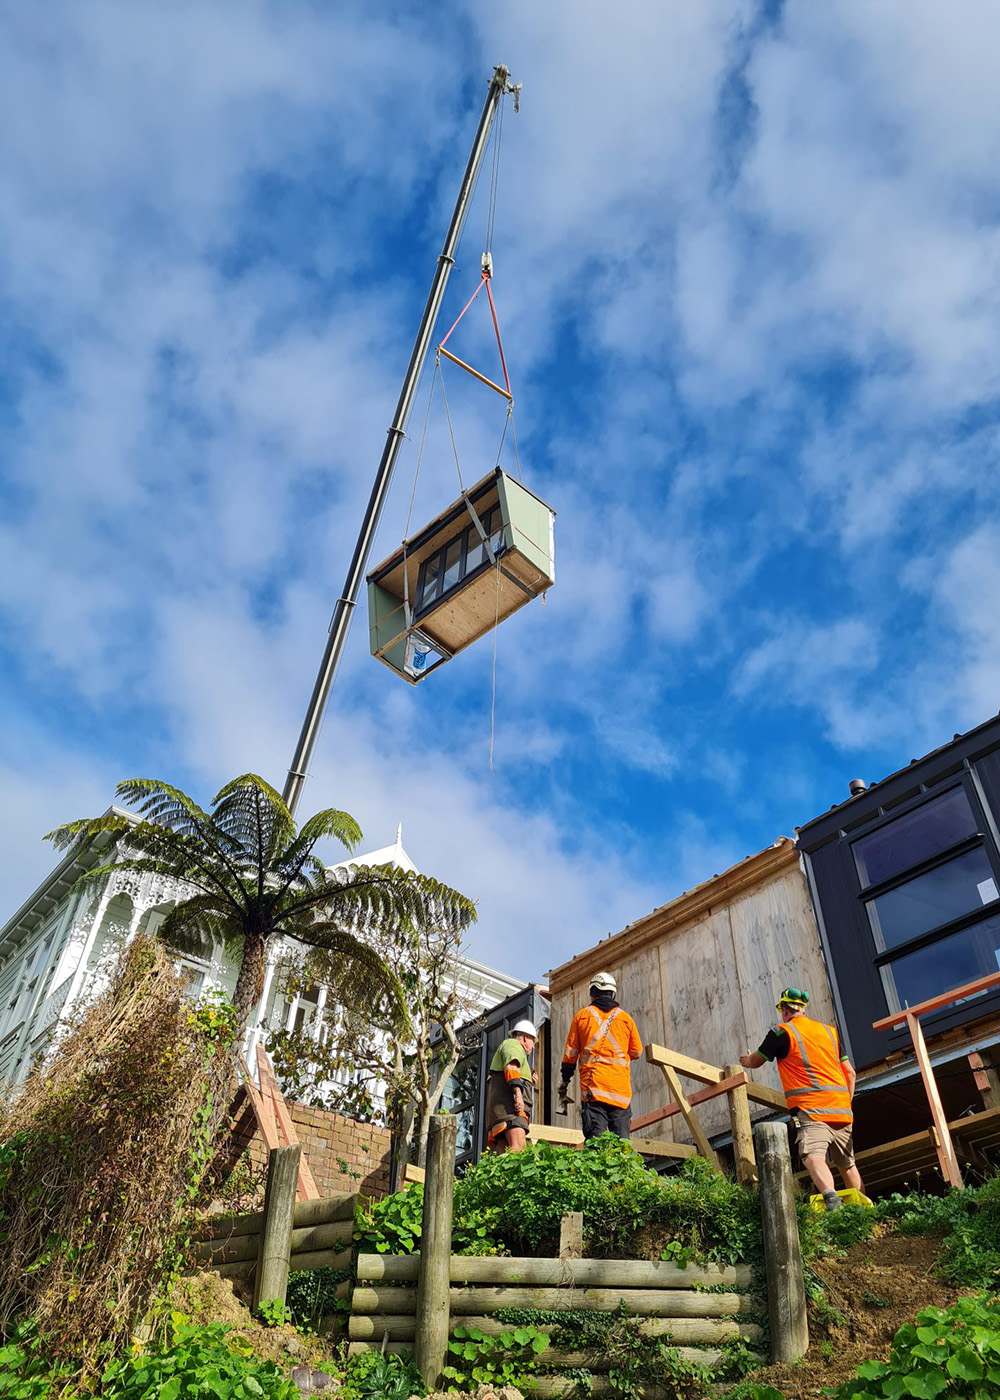 Building team watch as crane lowers Te Whare-iti module into place on customer's site.